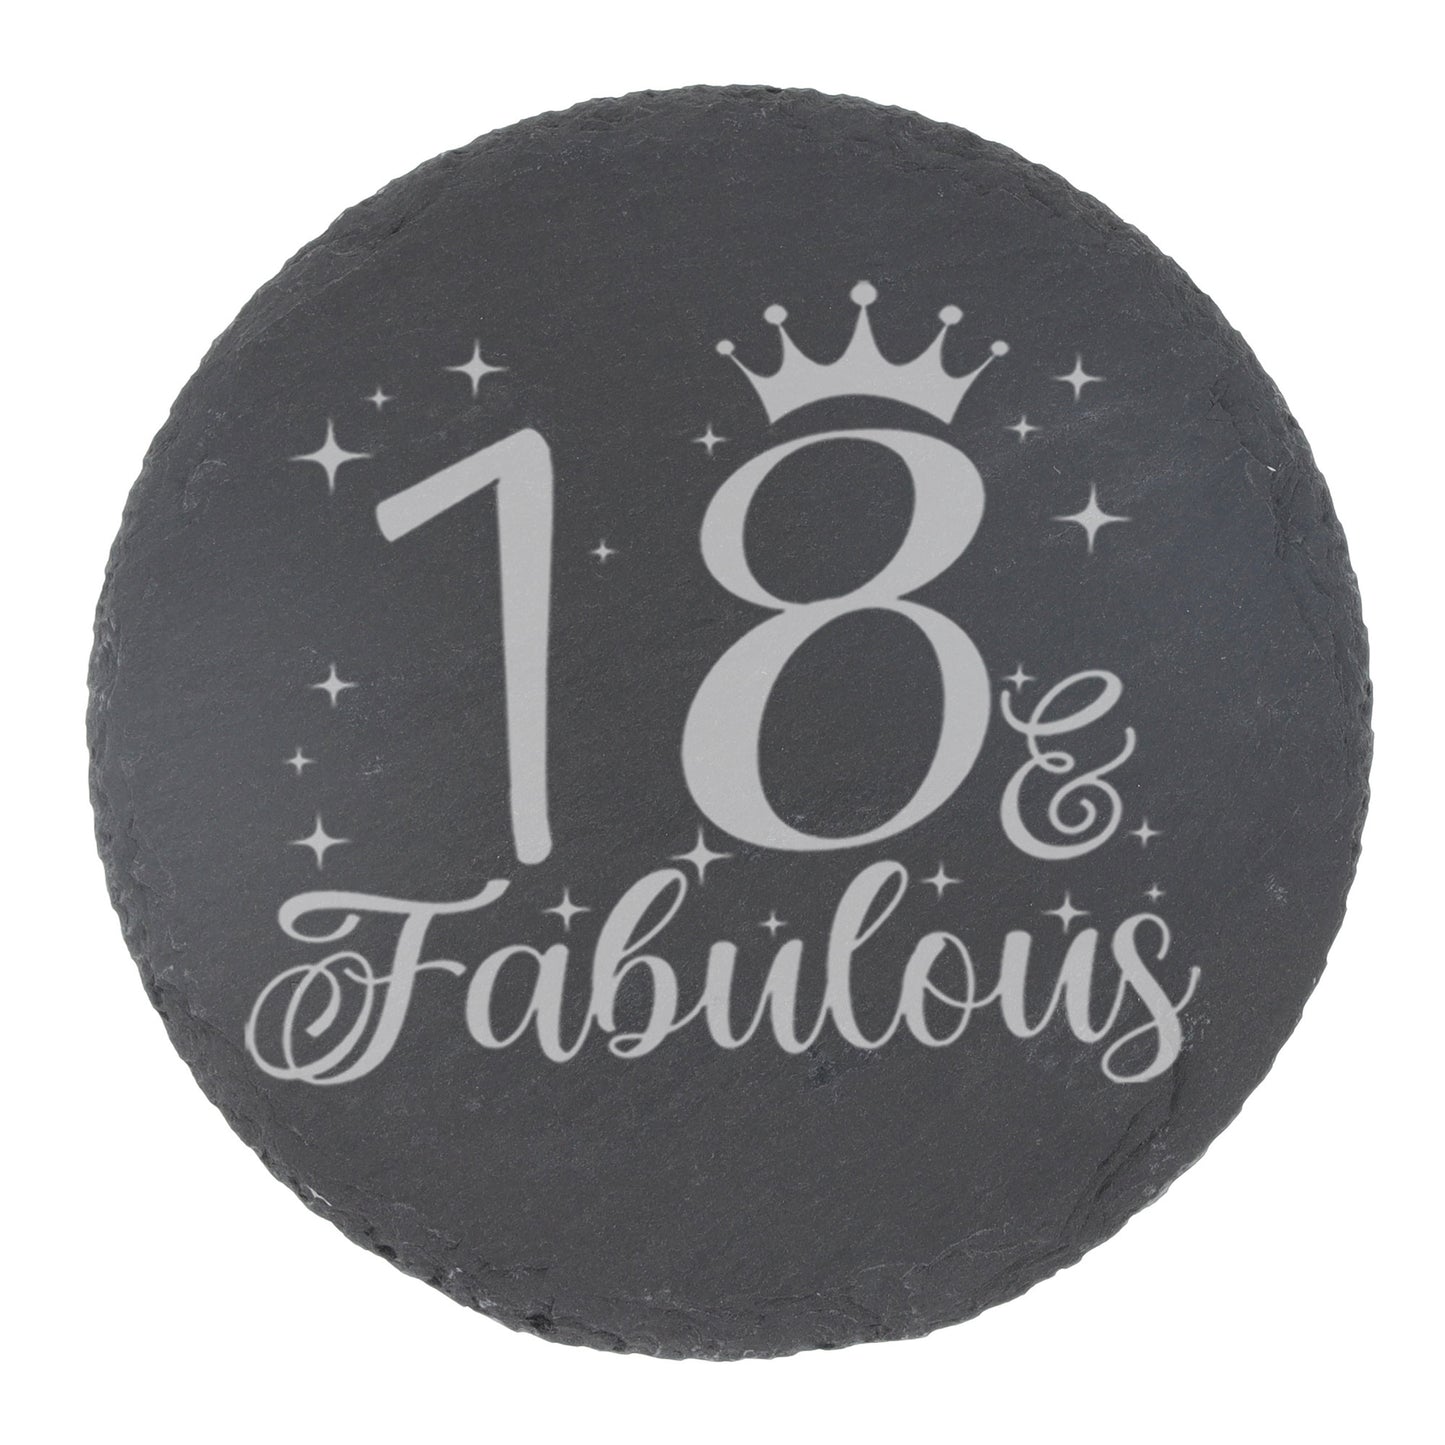 18 & Fabulous 18th Birthday Gift Engraved Wine Glass and/or Coaster Set  - Always Looking Good -   